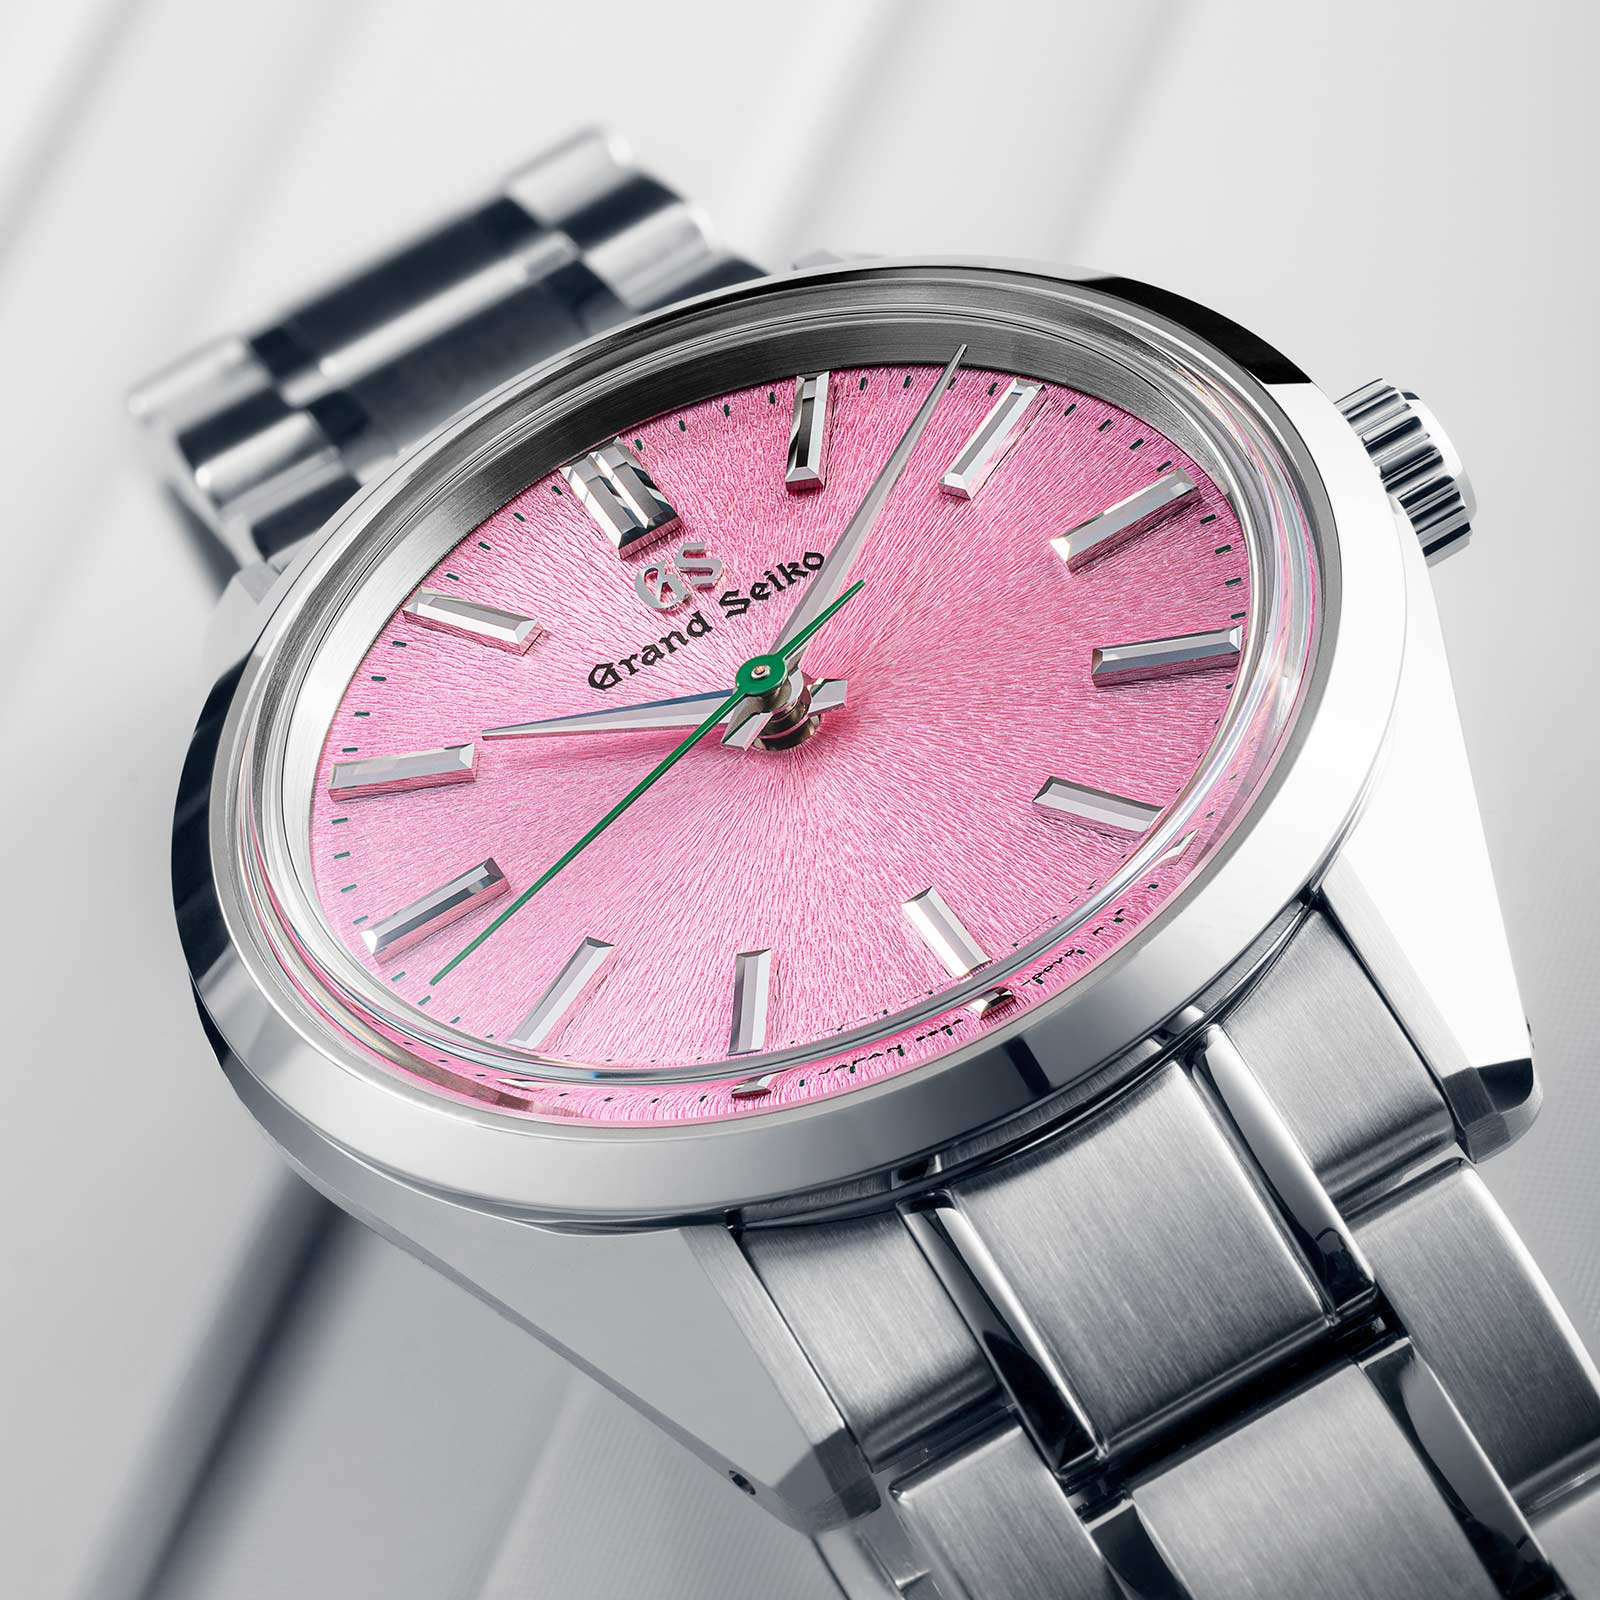 Grand Seiko Manual SBGW313 36.5mm 44GS US Exclusive Watch – Grand